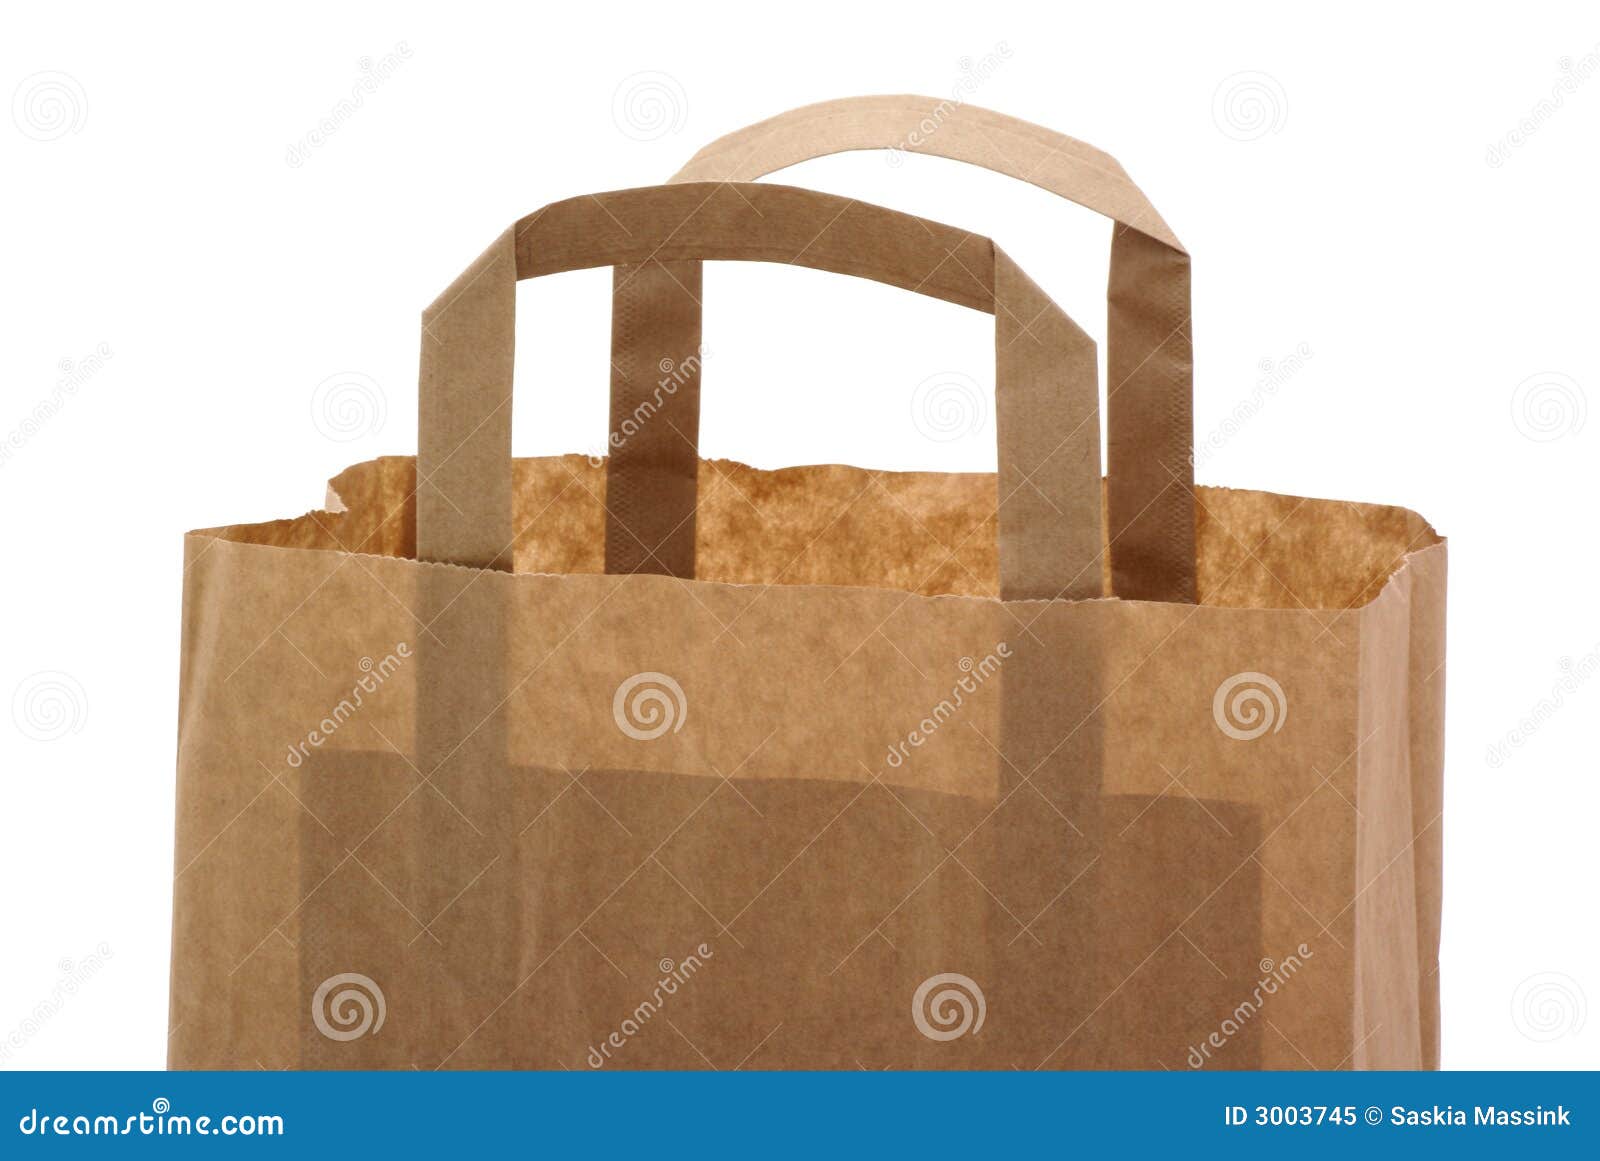 Part of a brown paper bag. stock image. Image of handle - 3003745